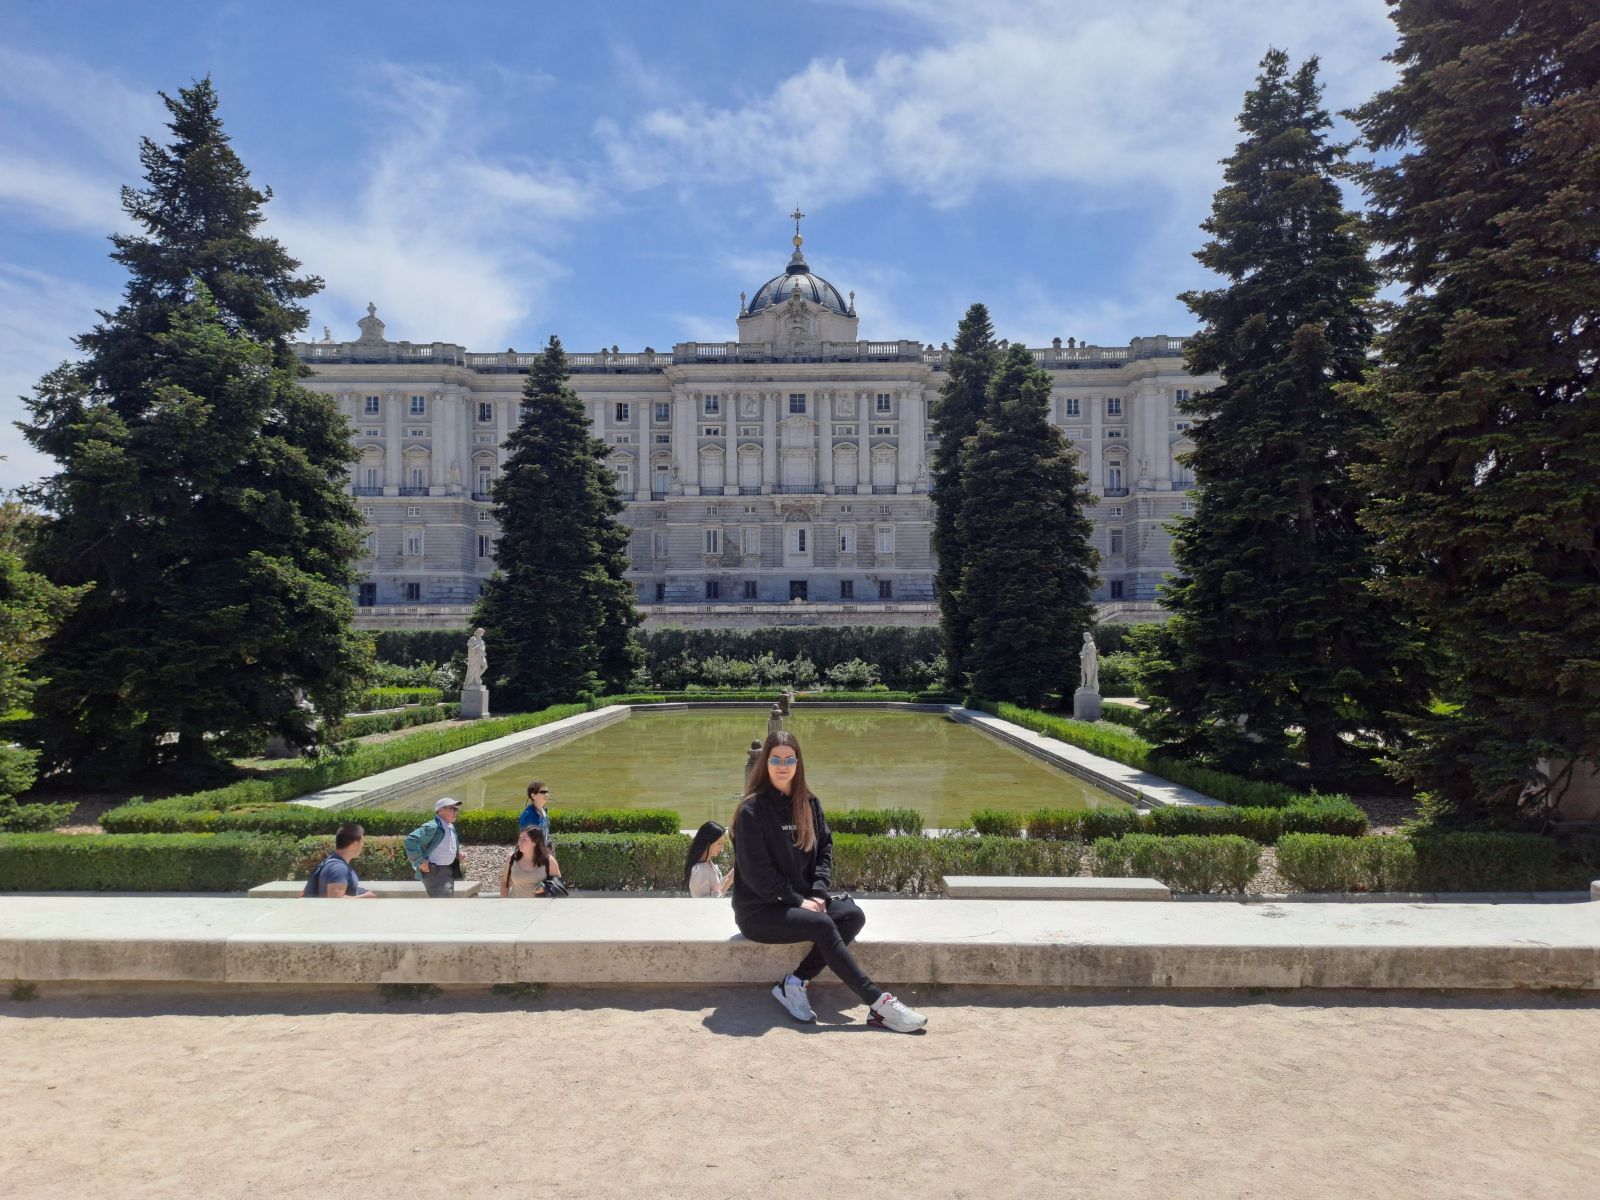 Students from the Faculty of Technical Sciences Čačak successfully completed their internship in Spain as part of the Erasmus+ Mobility Program.